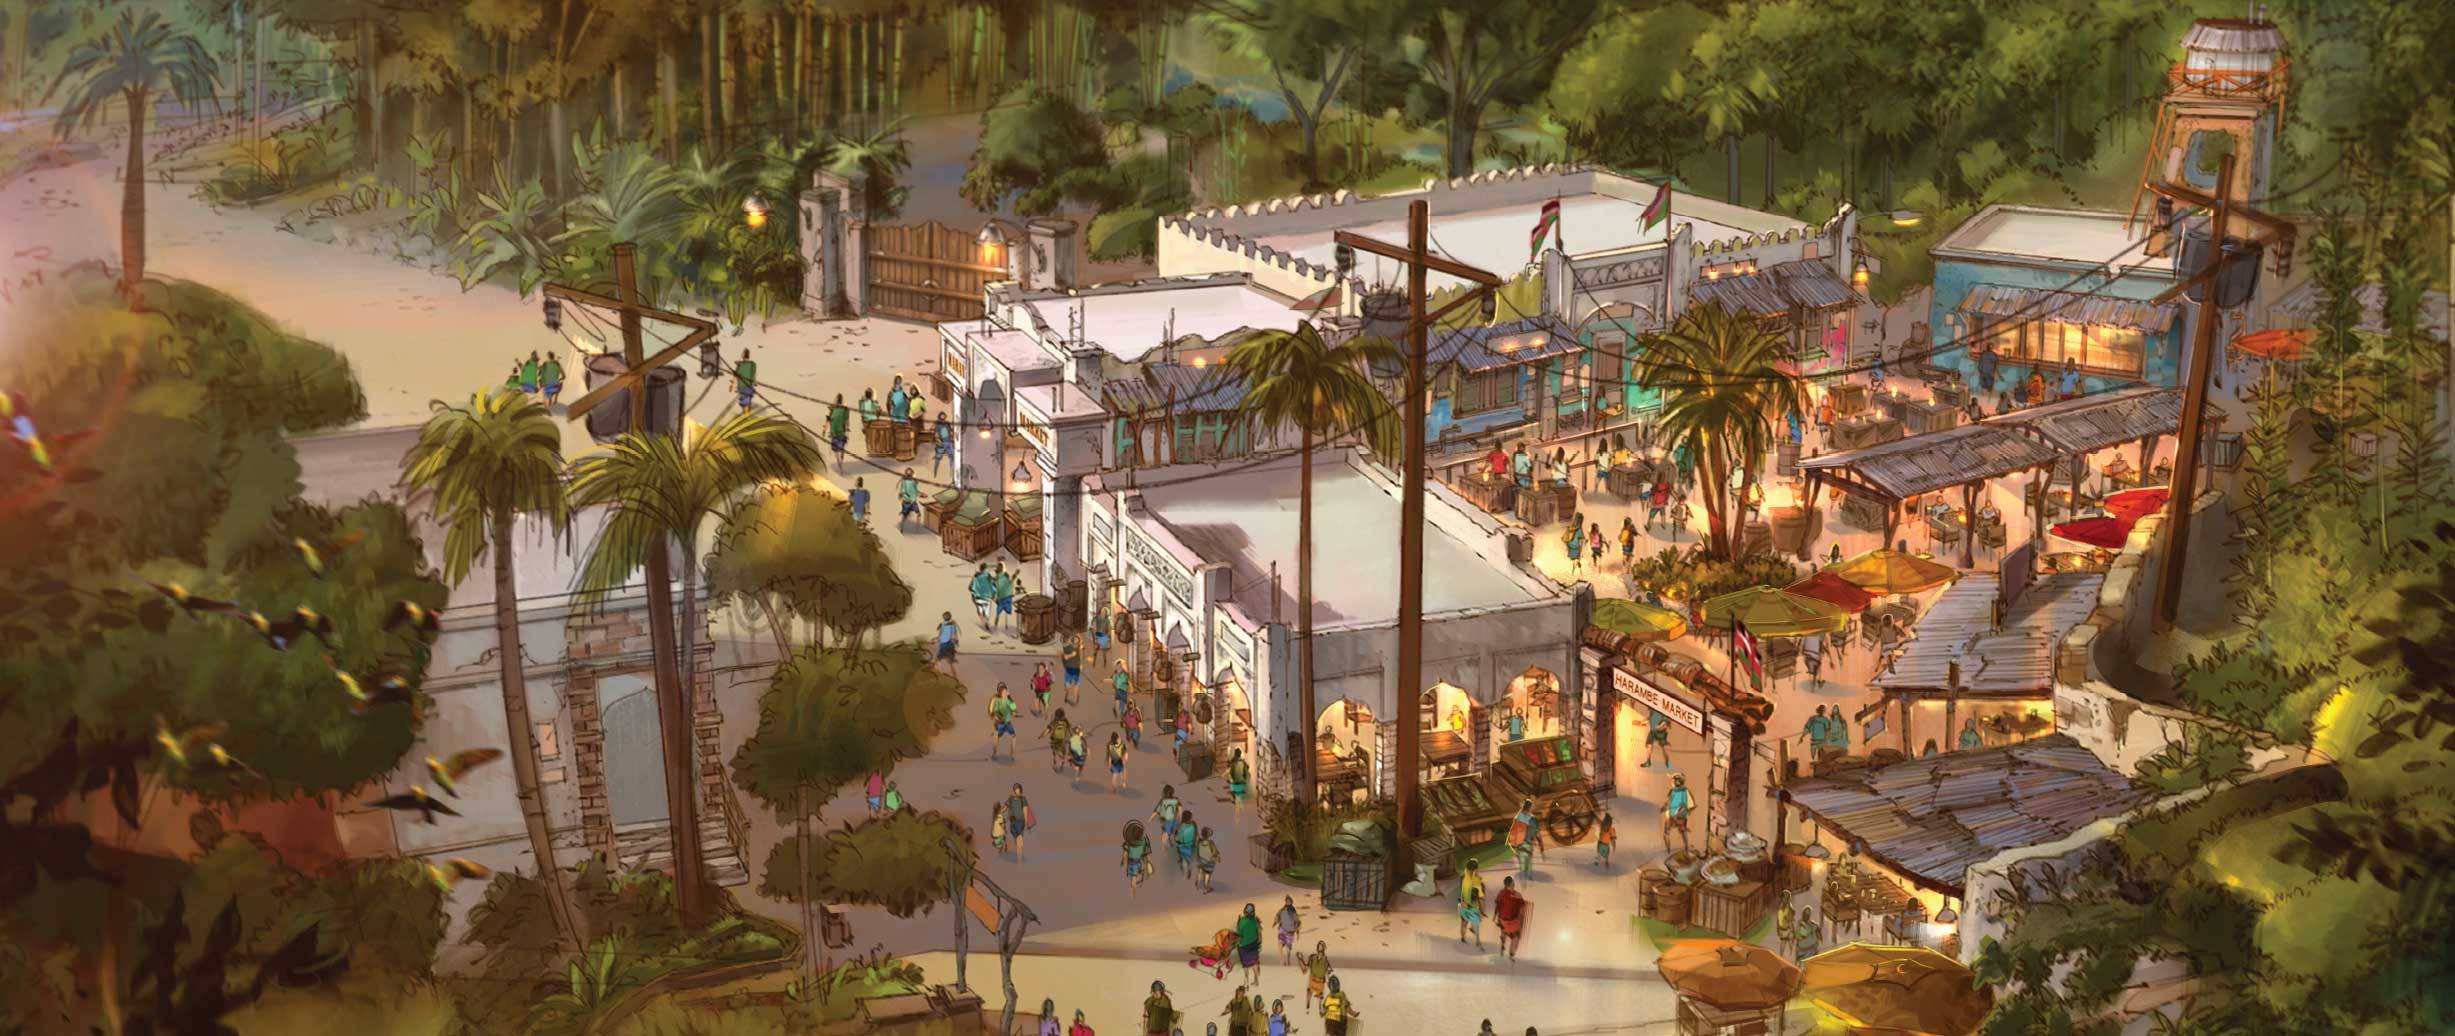 PHOTO - New concept art reveals details of the Africa Marketplace expansion coming to Harambe at Disney's Animal Kingdom